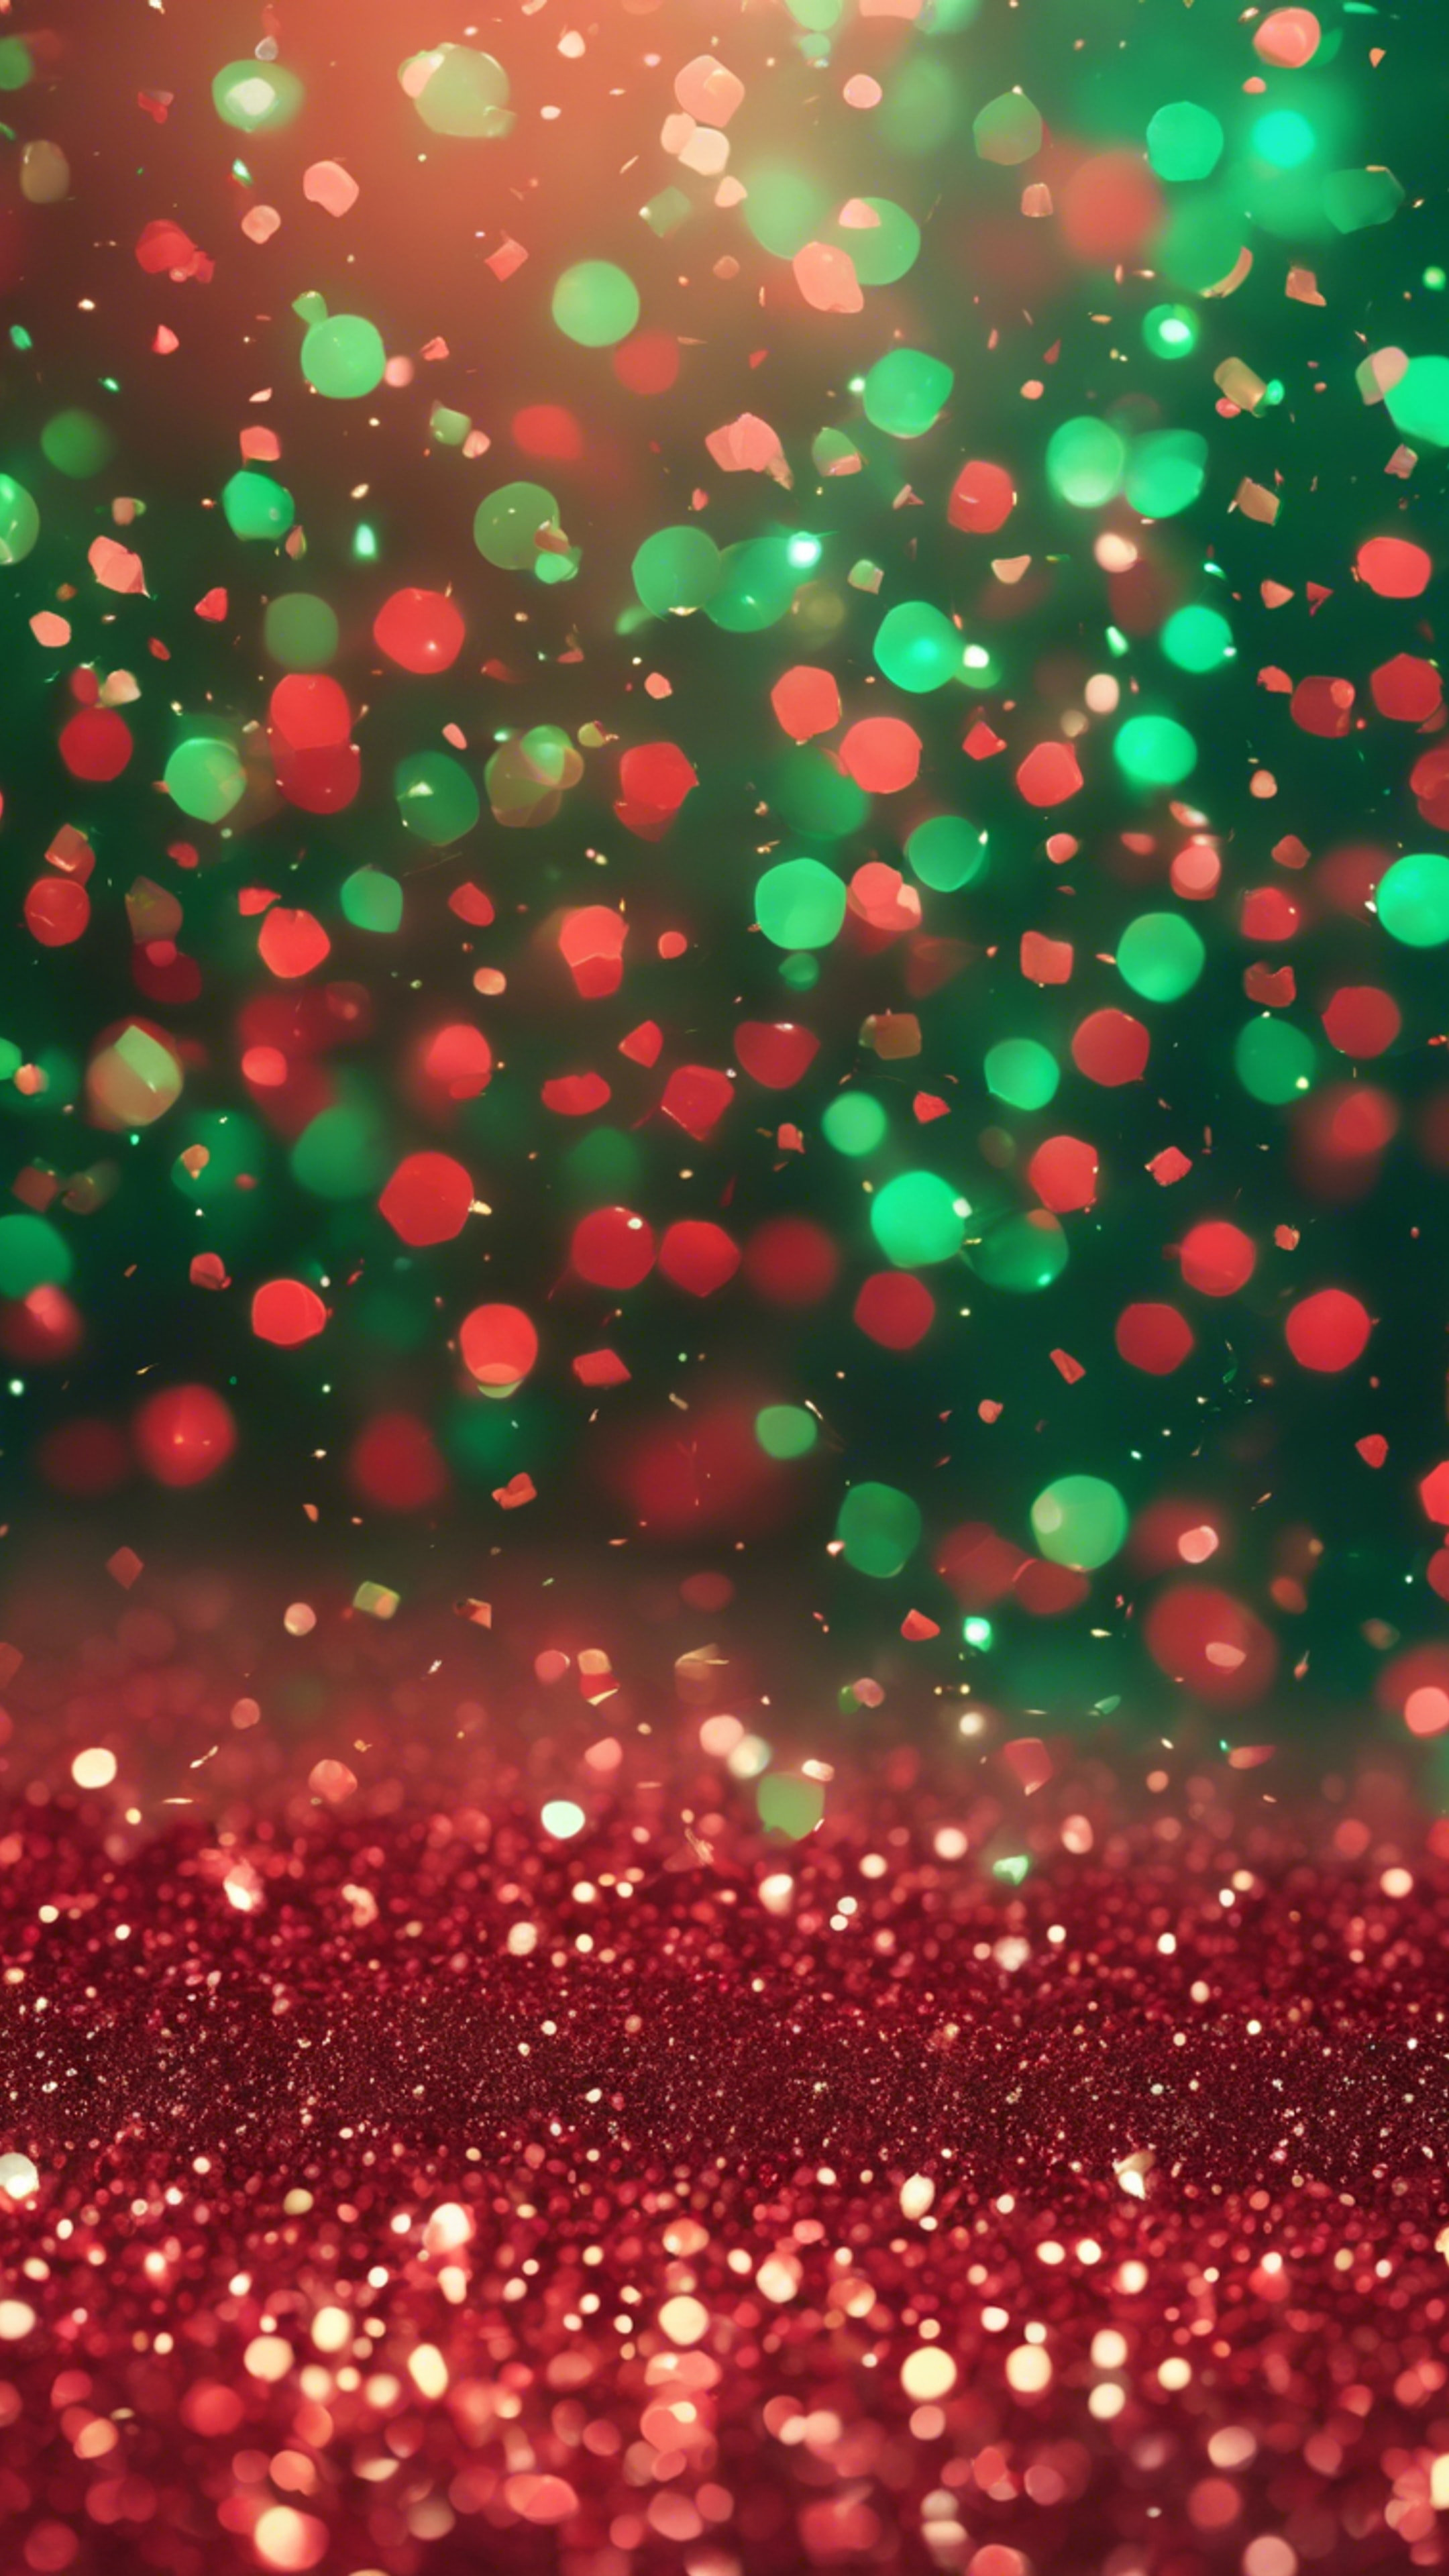 A seamless pattern of red and green glitter sparkles Wallpaper[5d1121e27deb4297acdf]